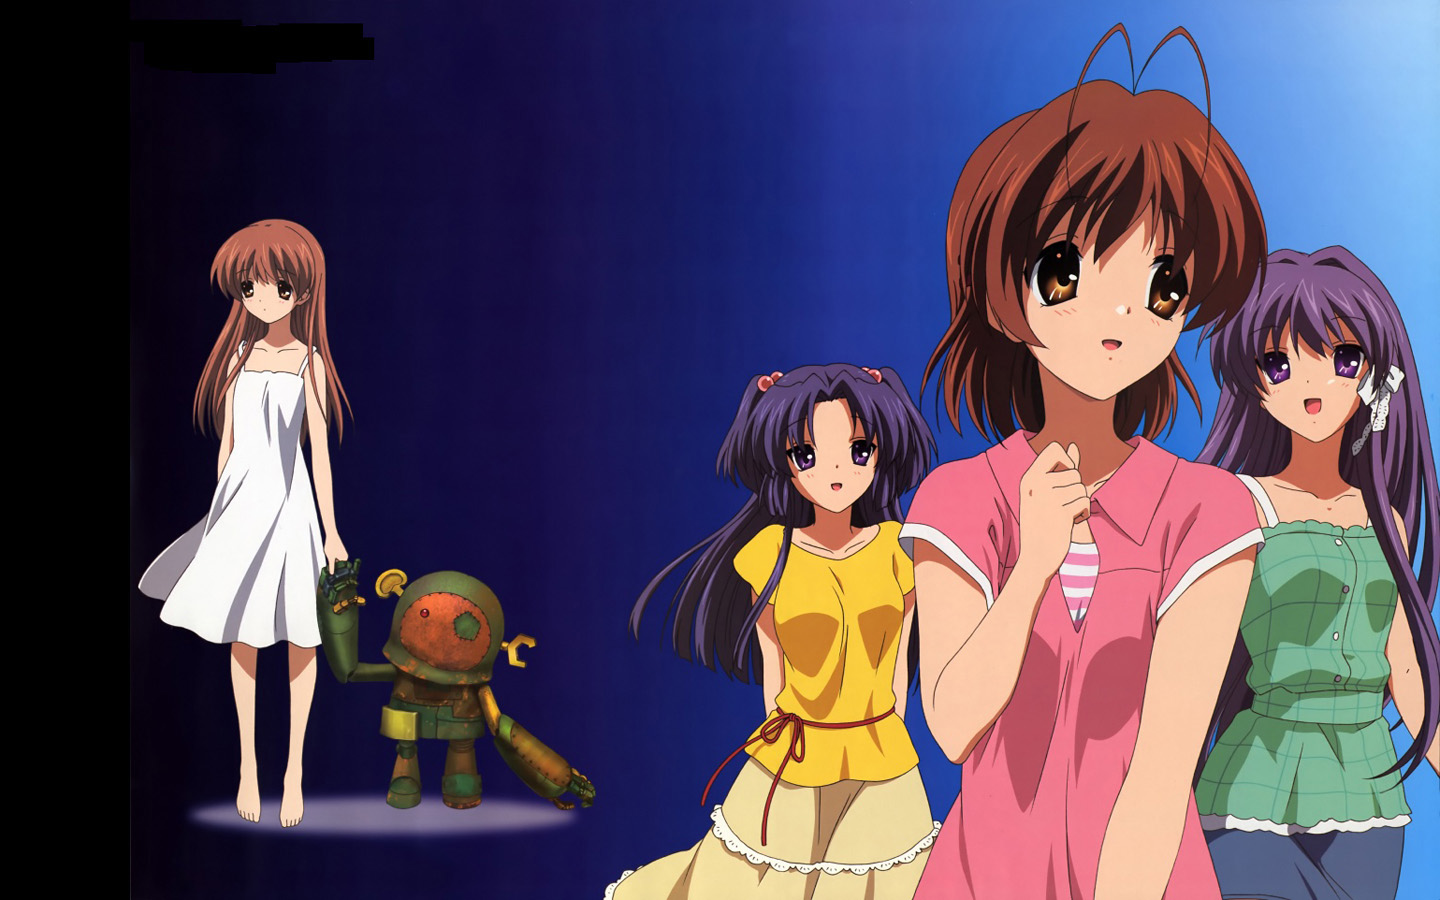 Fantastic wallpaper of the girl in the illusionary world : r/Clannad